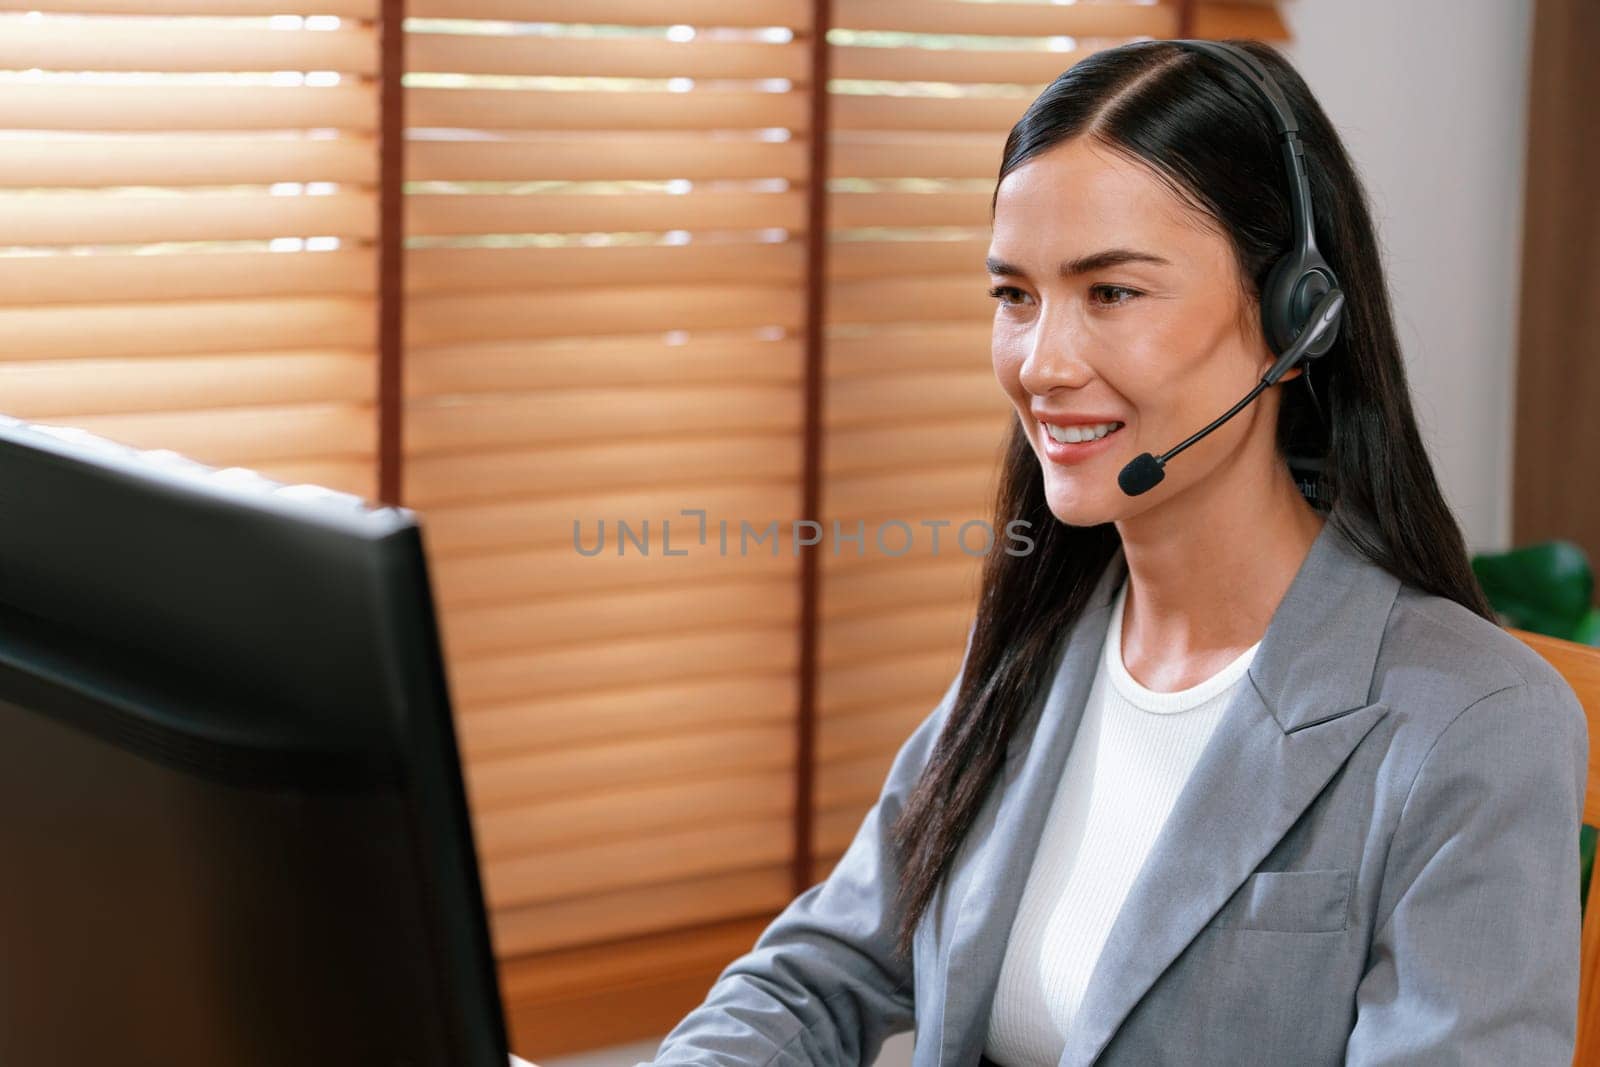 Female call center operator or customer service helpdesk staff working on workspace while talking on the headset to provide assistance for customer. Professional modern business service. Blithe